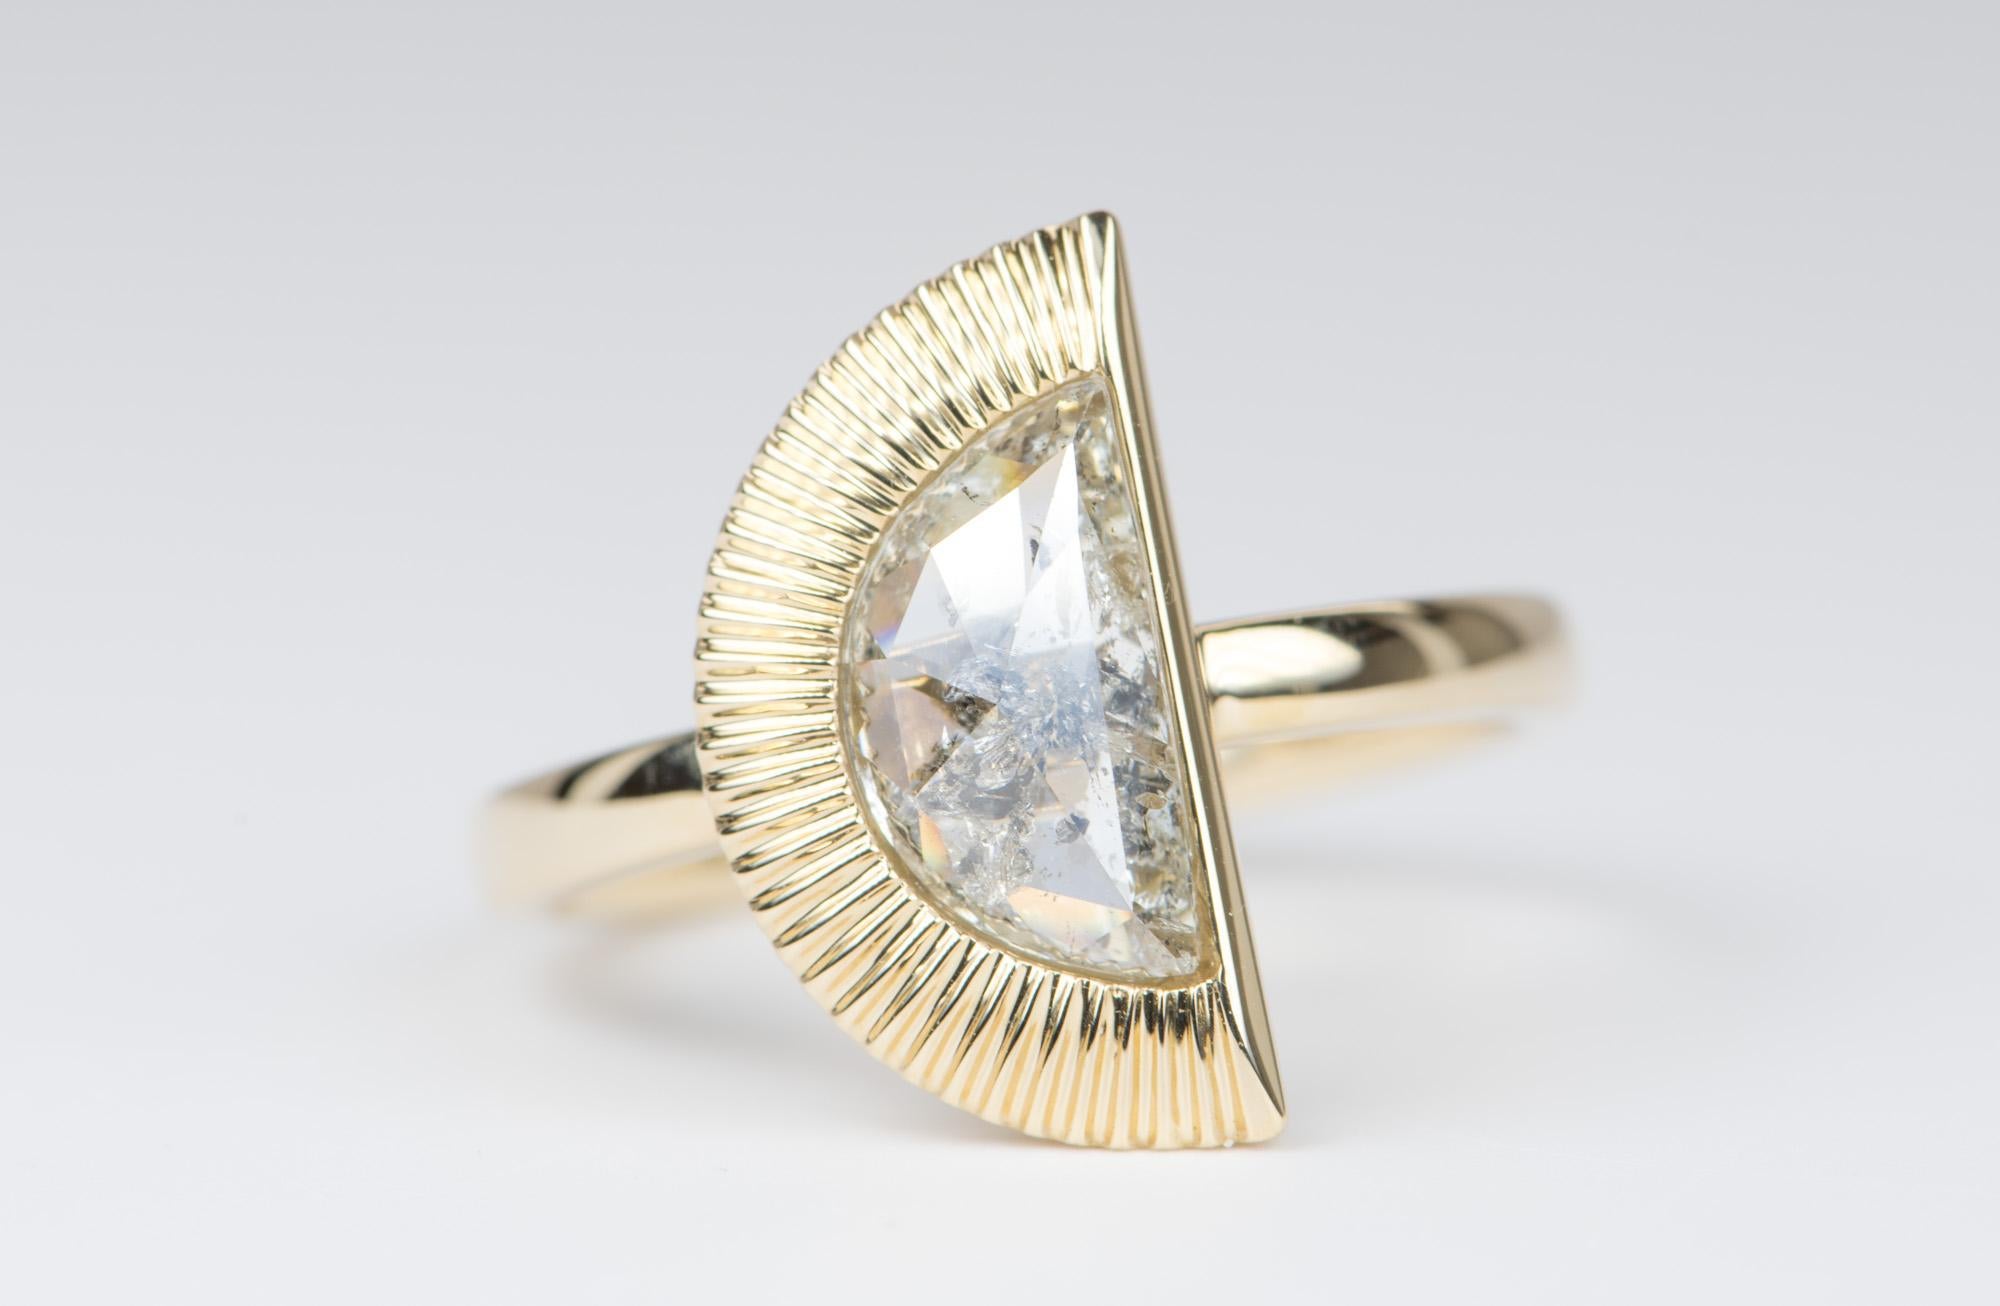 ♥  Solid 14K yellow gold ring set with a high luster, sparkly clear gray diamond in the center, bezel set with a half halo textured sunray design, giving the ring a celestial feeling
♥  The overall setting measures 9.05mm in width, 16.6mm in length,